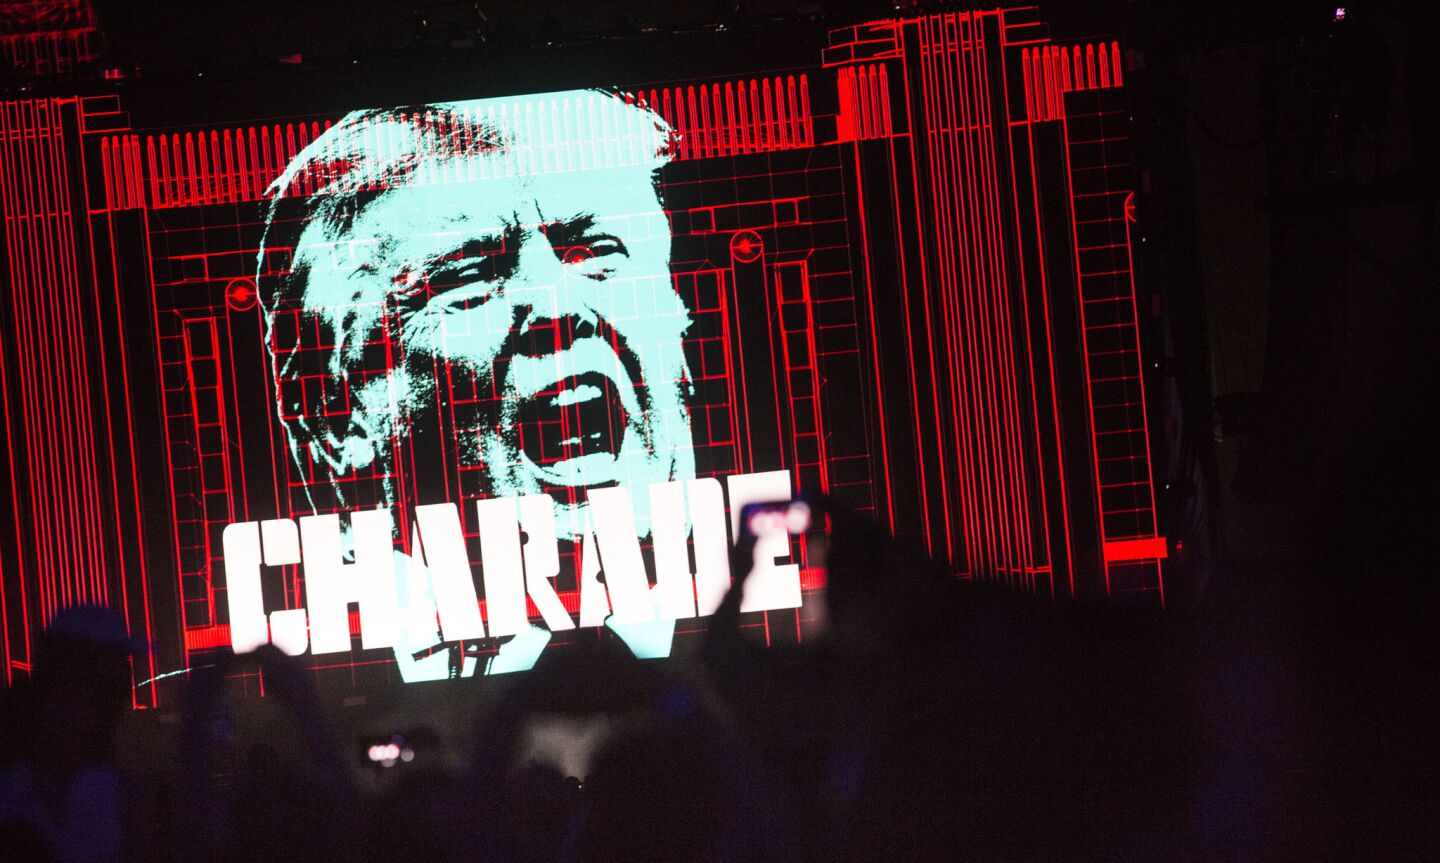 An image of Donald Trump is projected on a large screen during Roger Waters' set at Desert Trip.